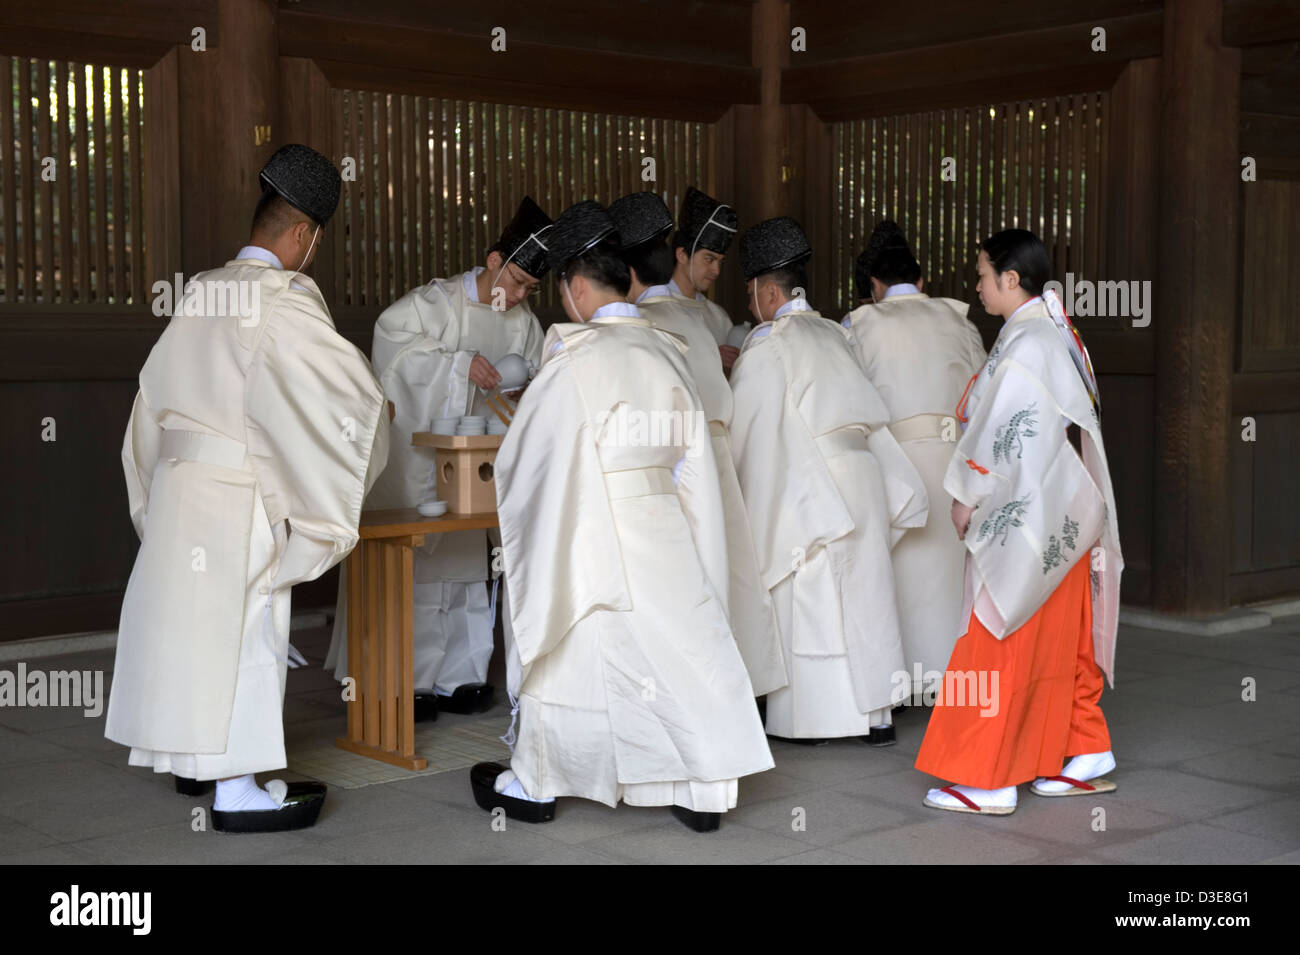 Shinto priests and a miko maiden in red robe take part in sake drinking religious ritual ceremony at Meiji Jingu, Tokyo, Japan. Stock Photo